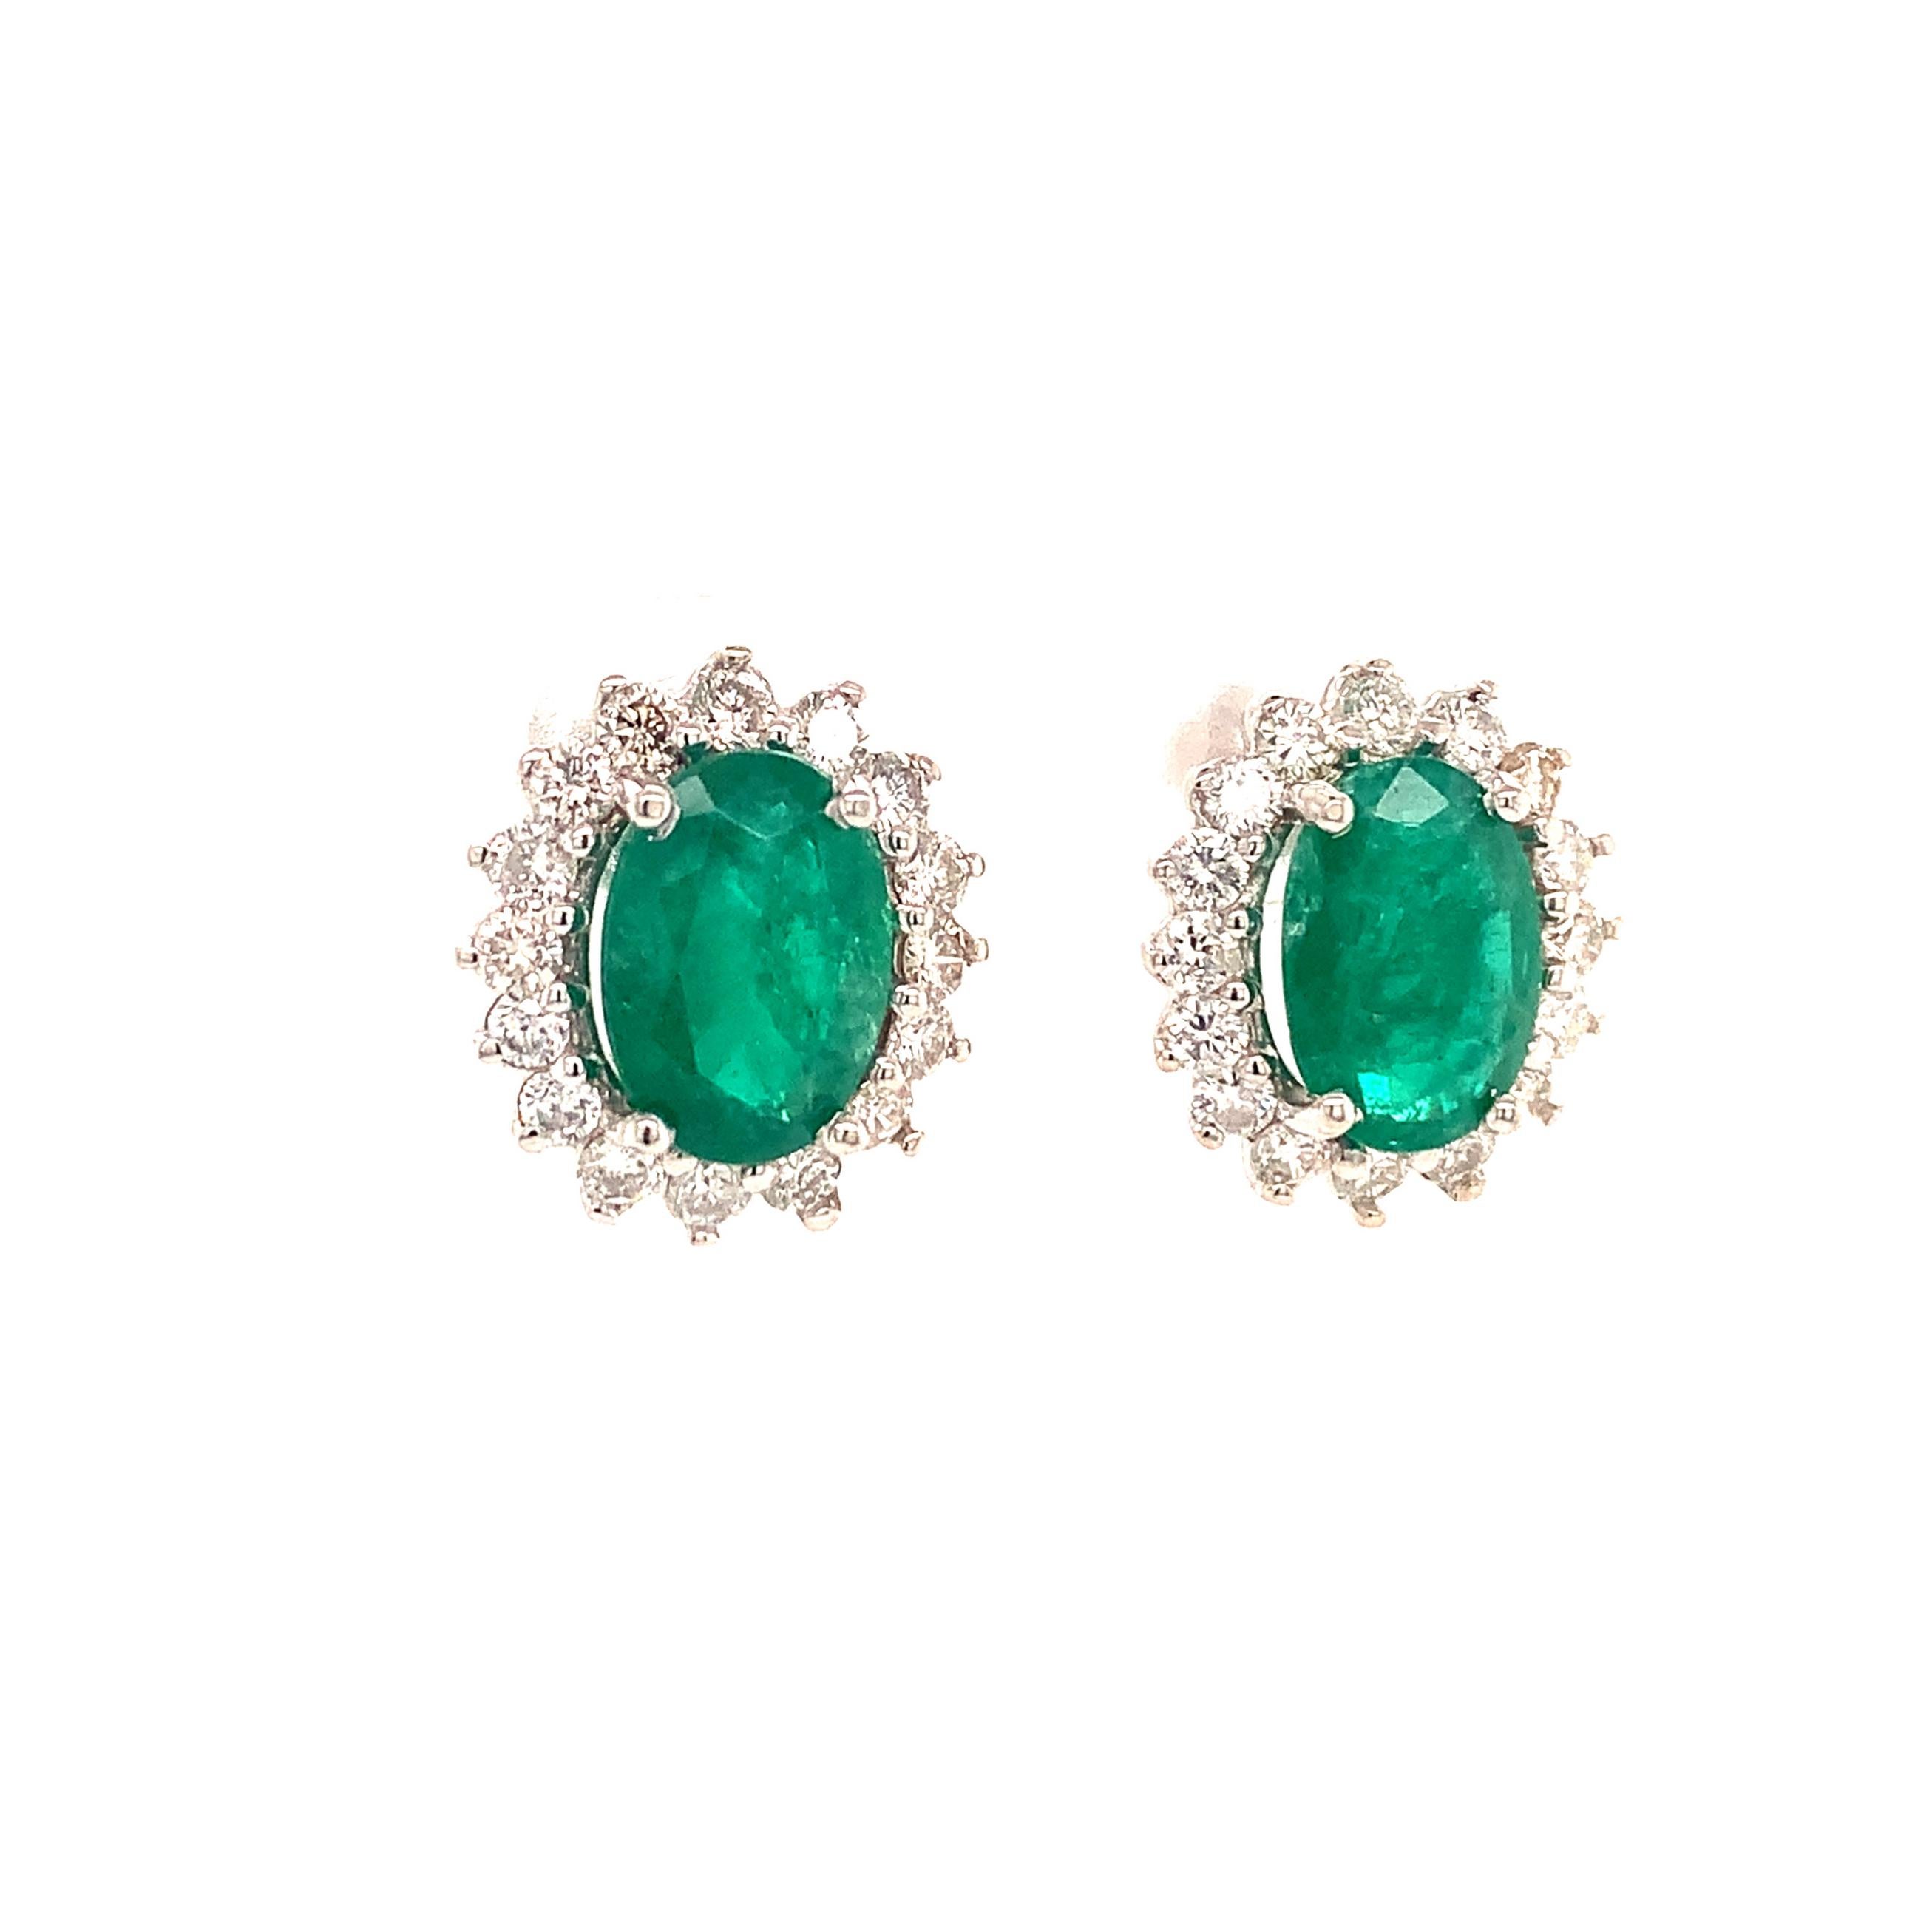 Natural Finely Faceted Quality Emerald Diamond Earrings 14k Gold 5.03 TCW Certified $6,550 113437

This is a Unique Custom Made Glamorous Piece of Jewelry!

Nothing says, “I Love you” more than Diamonds and Pearls!

This pair of Emerald earrings